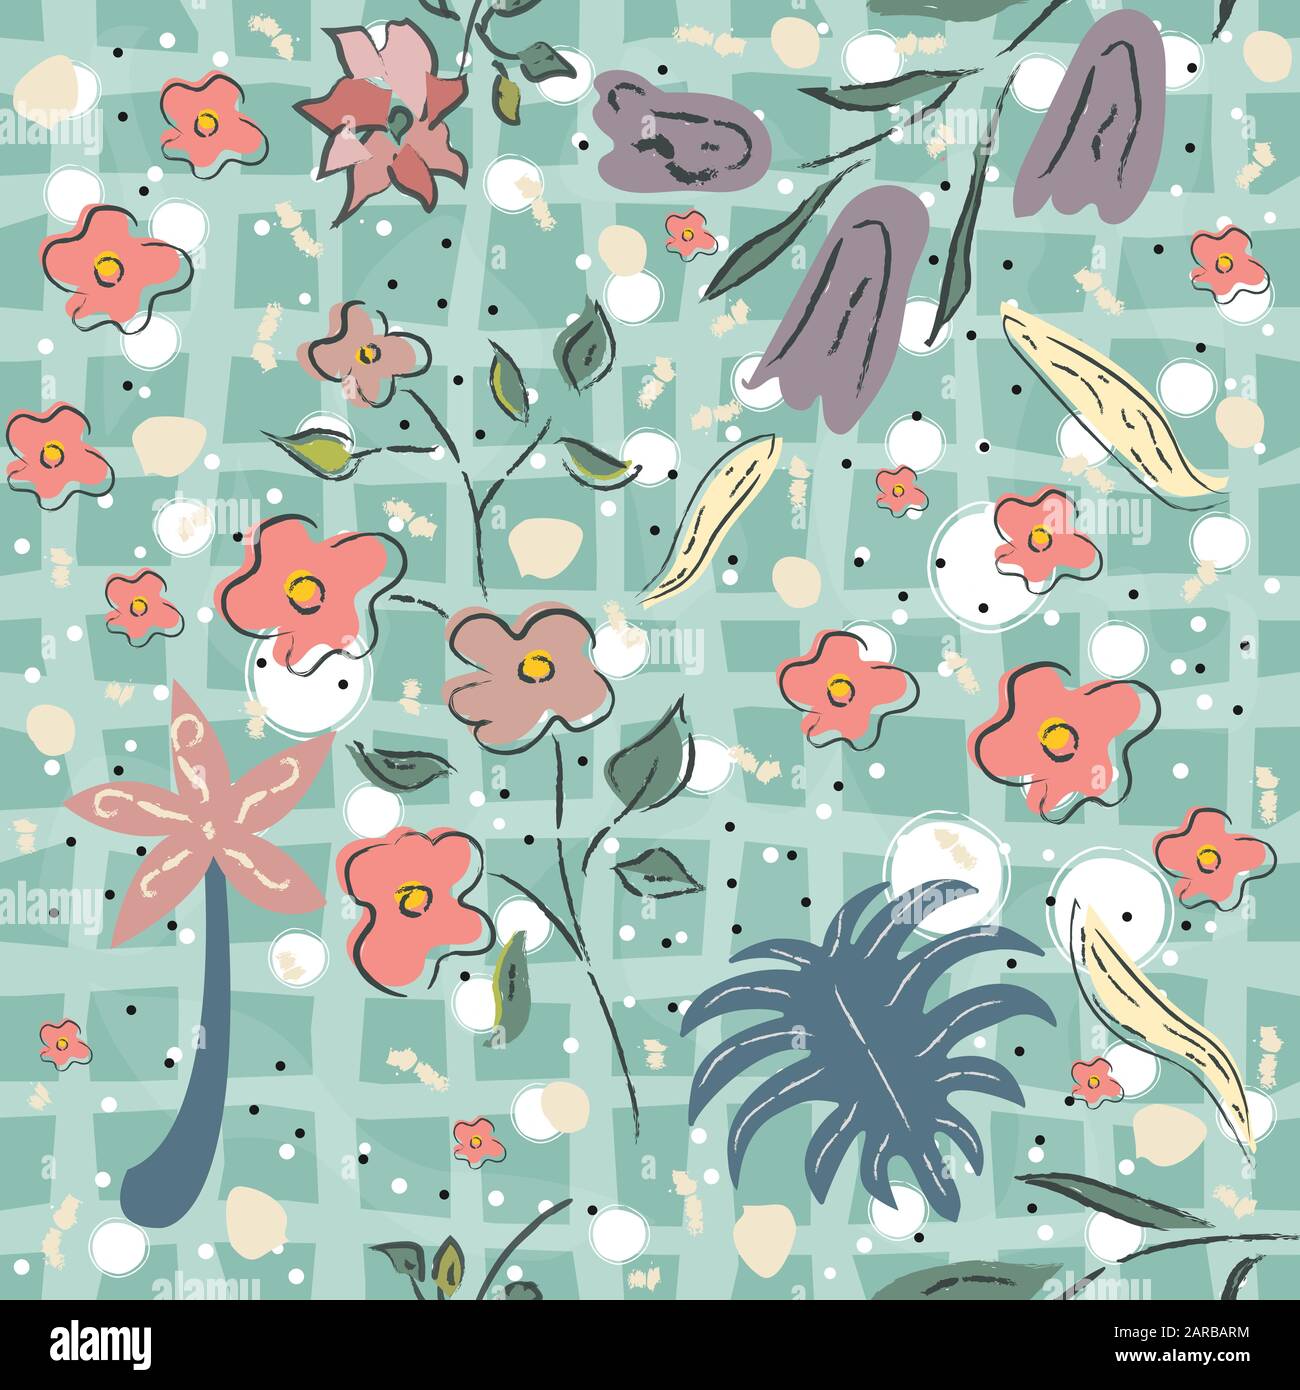 Floral Seamless Pattern. For backgrounds, wallpapers, fabric, prints, textiles, wrapping, cards, swatches, t-shirts, scrapbooks, blankets, pillows, et Stock Vector